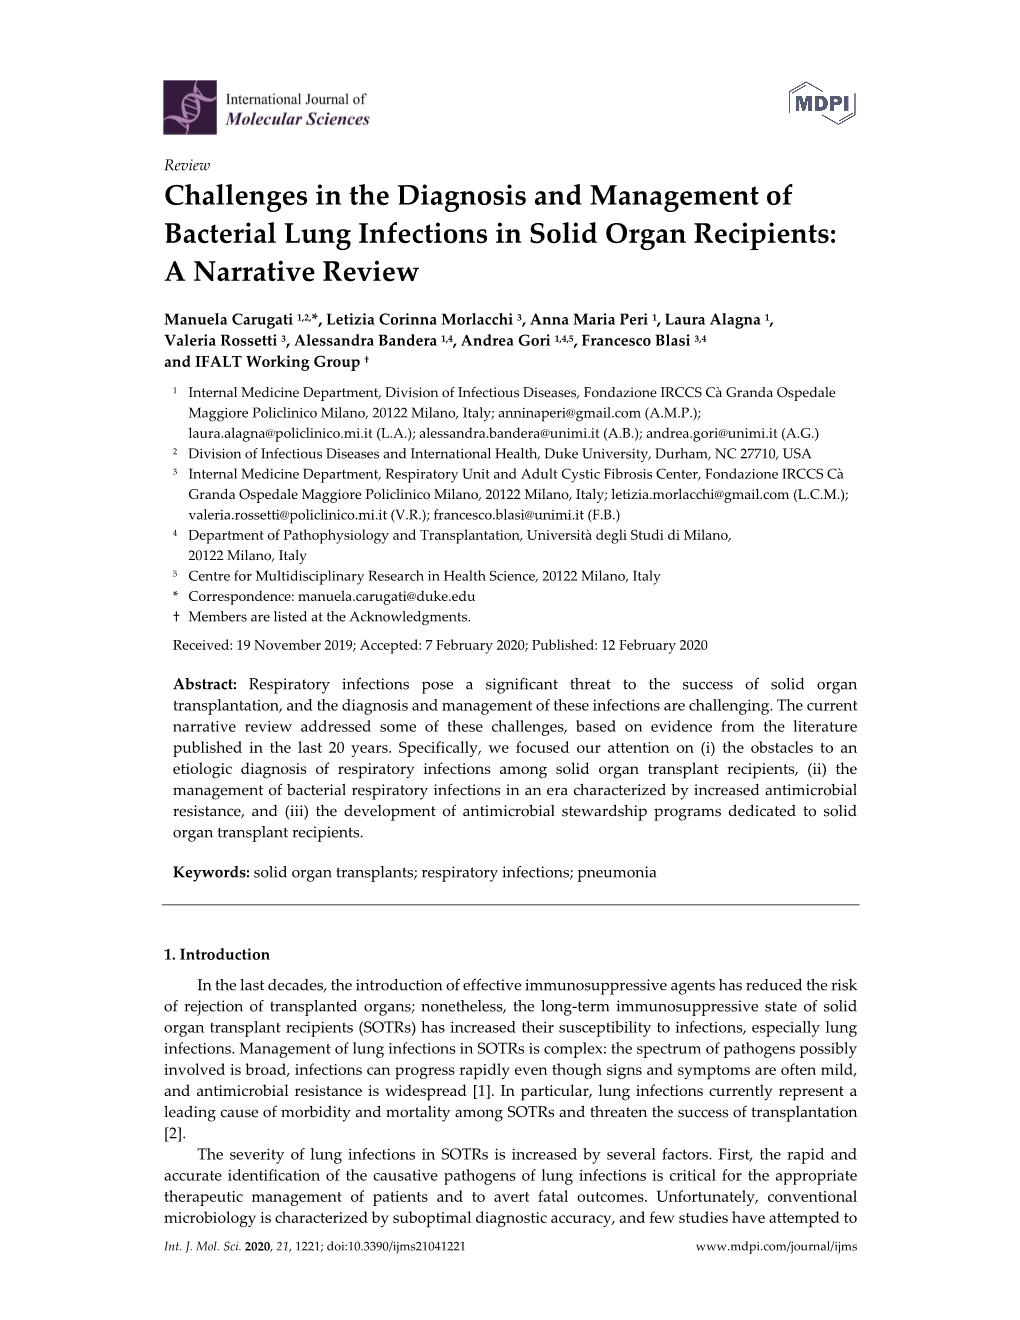 Challenges in the Diagnosis and Management of Bacterial Lung Infections in Solid Organ Recipients: a Narrative Review